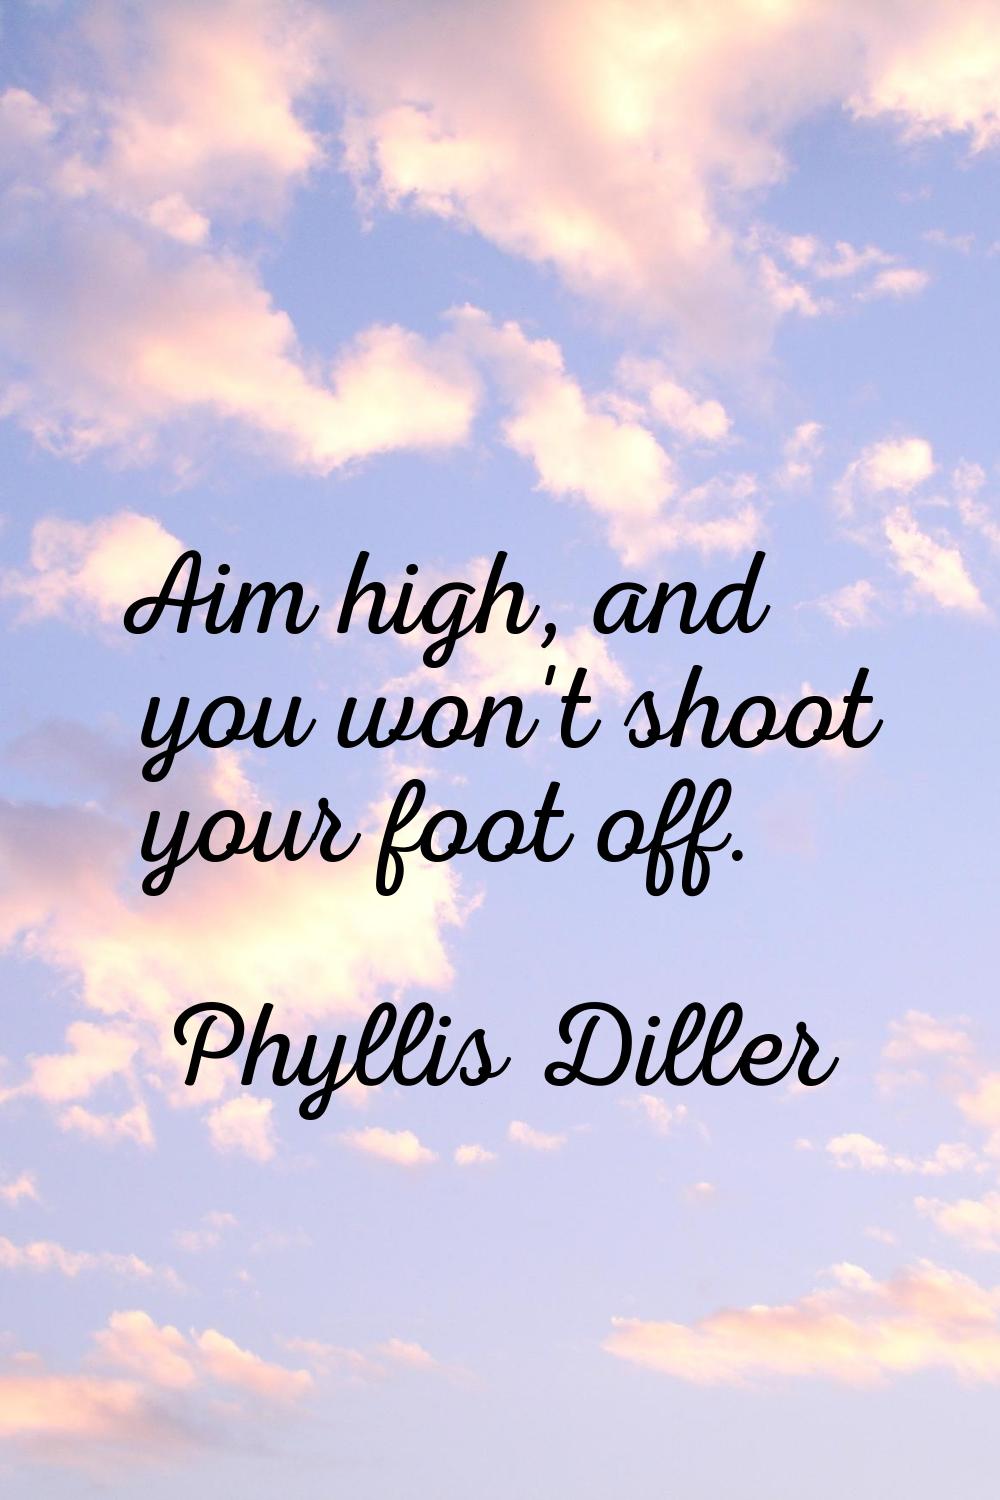 Aim high, and you won't shoot your foot off.